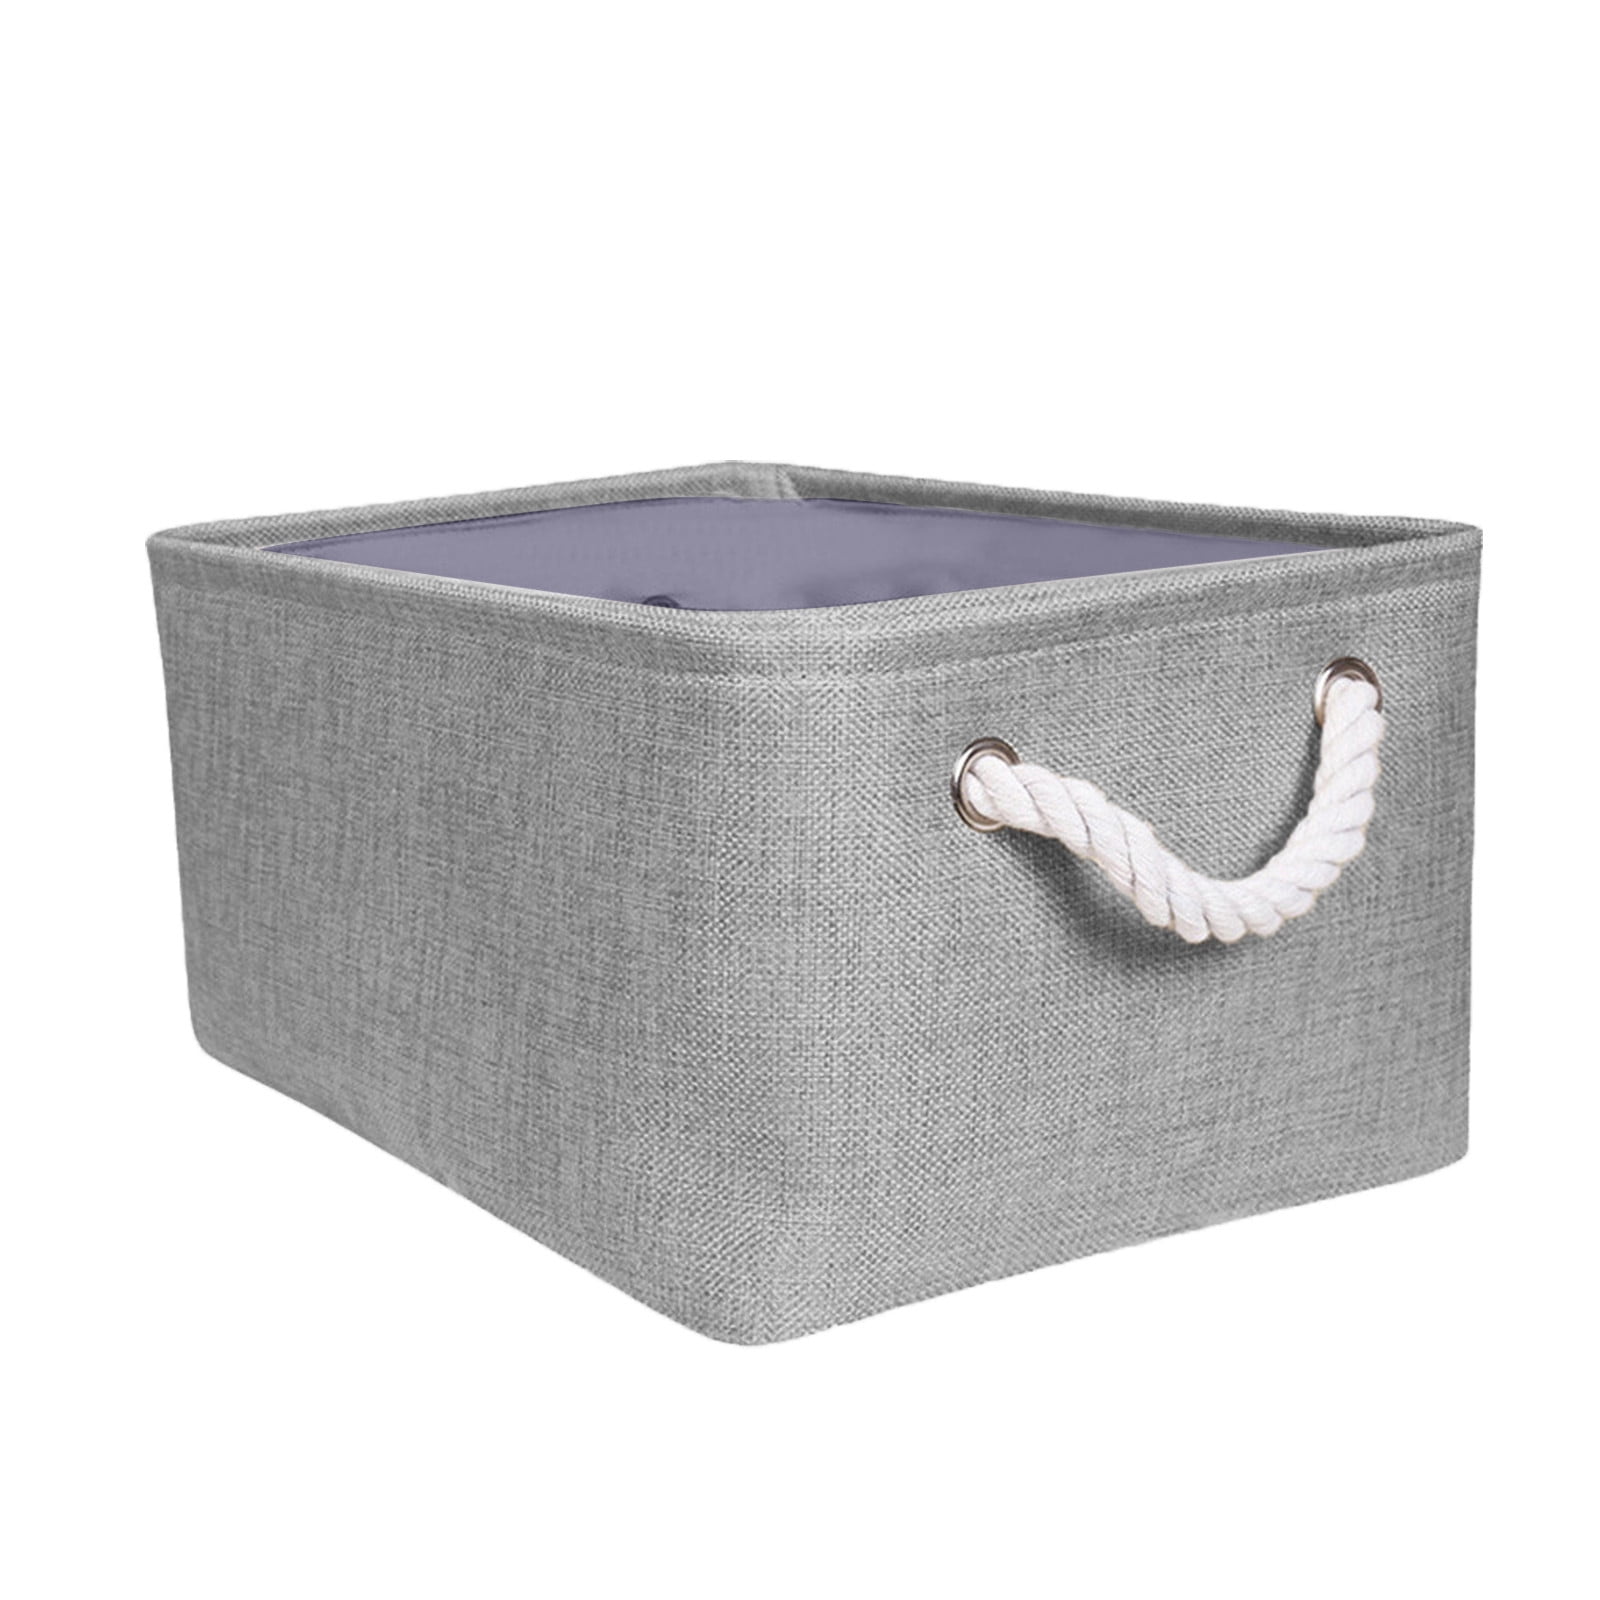 White Baby Nursery Kids Room Decor Inwagui Small Storage Basket Natural Cotton Rope Woven Storage Box Office Desk Basket Organizer for Toys 